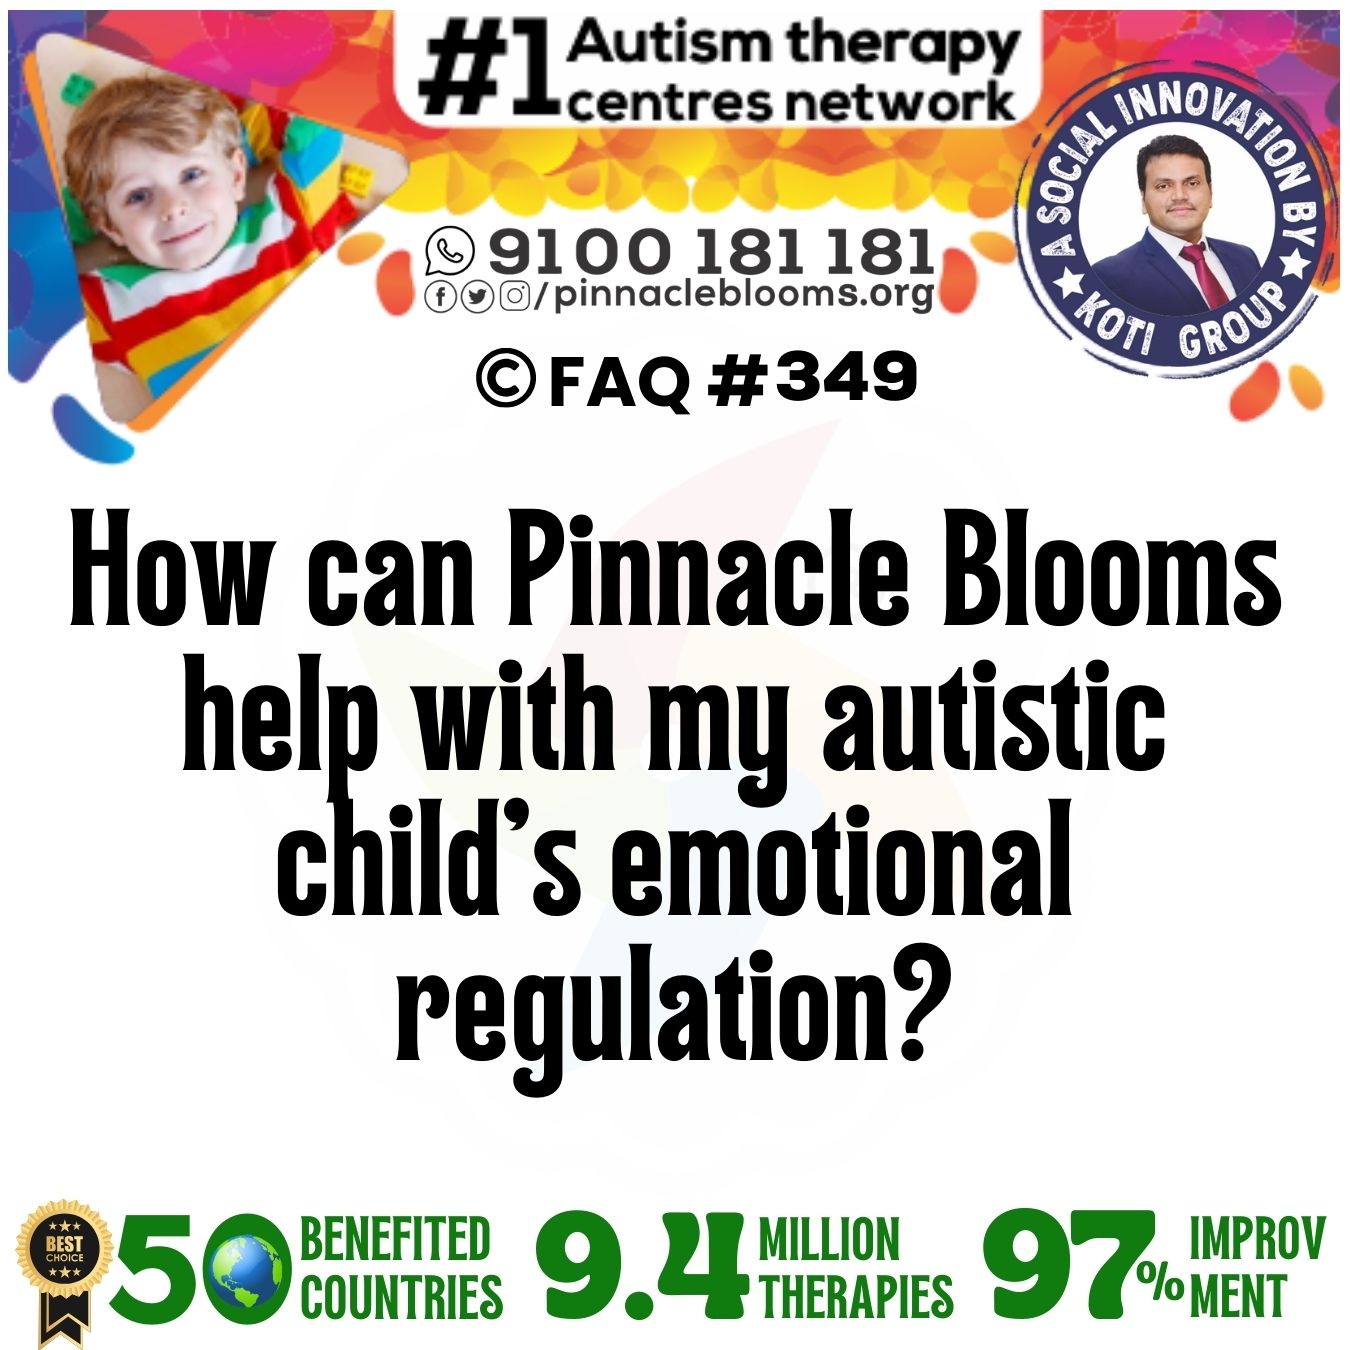 How can Pinnacle Blooms help with my autistic child's emotional regulation?